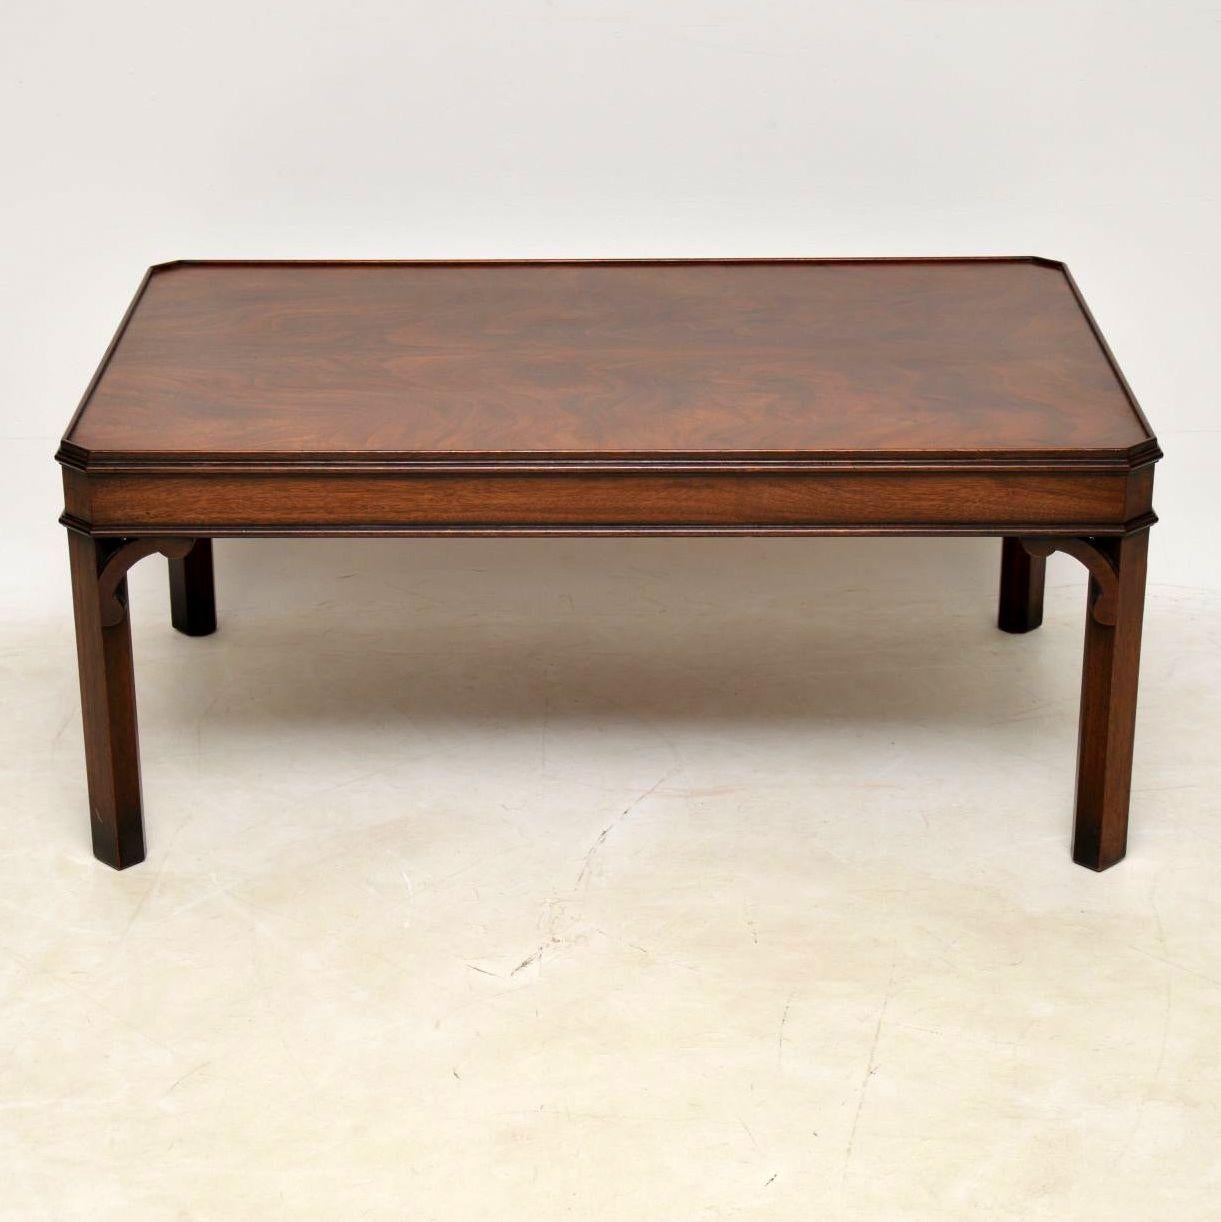 Large antique Chippendale style mahogany coffee table in good condition dating to circa 1950s period. The top is a well figured flame mahogany surrounded by a short top edging. The legs are chamfered and there are shaped brackets joining up either